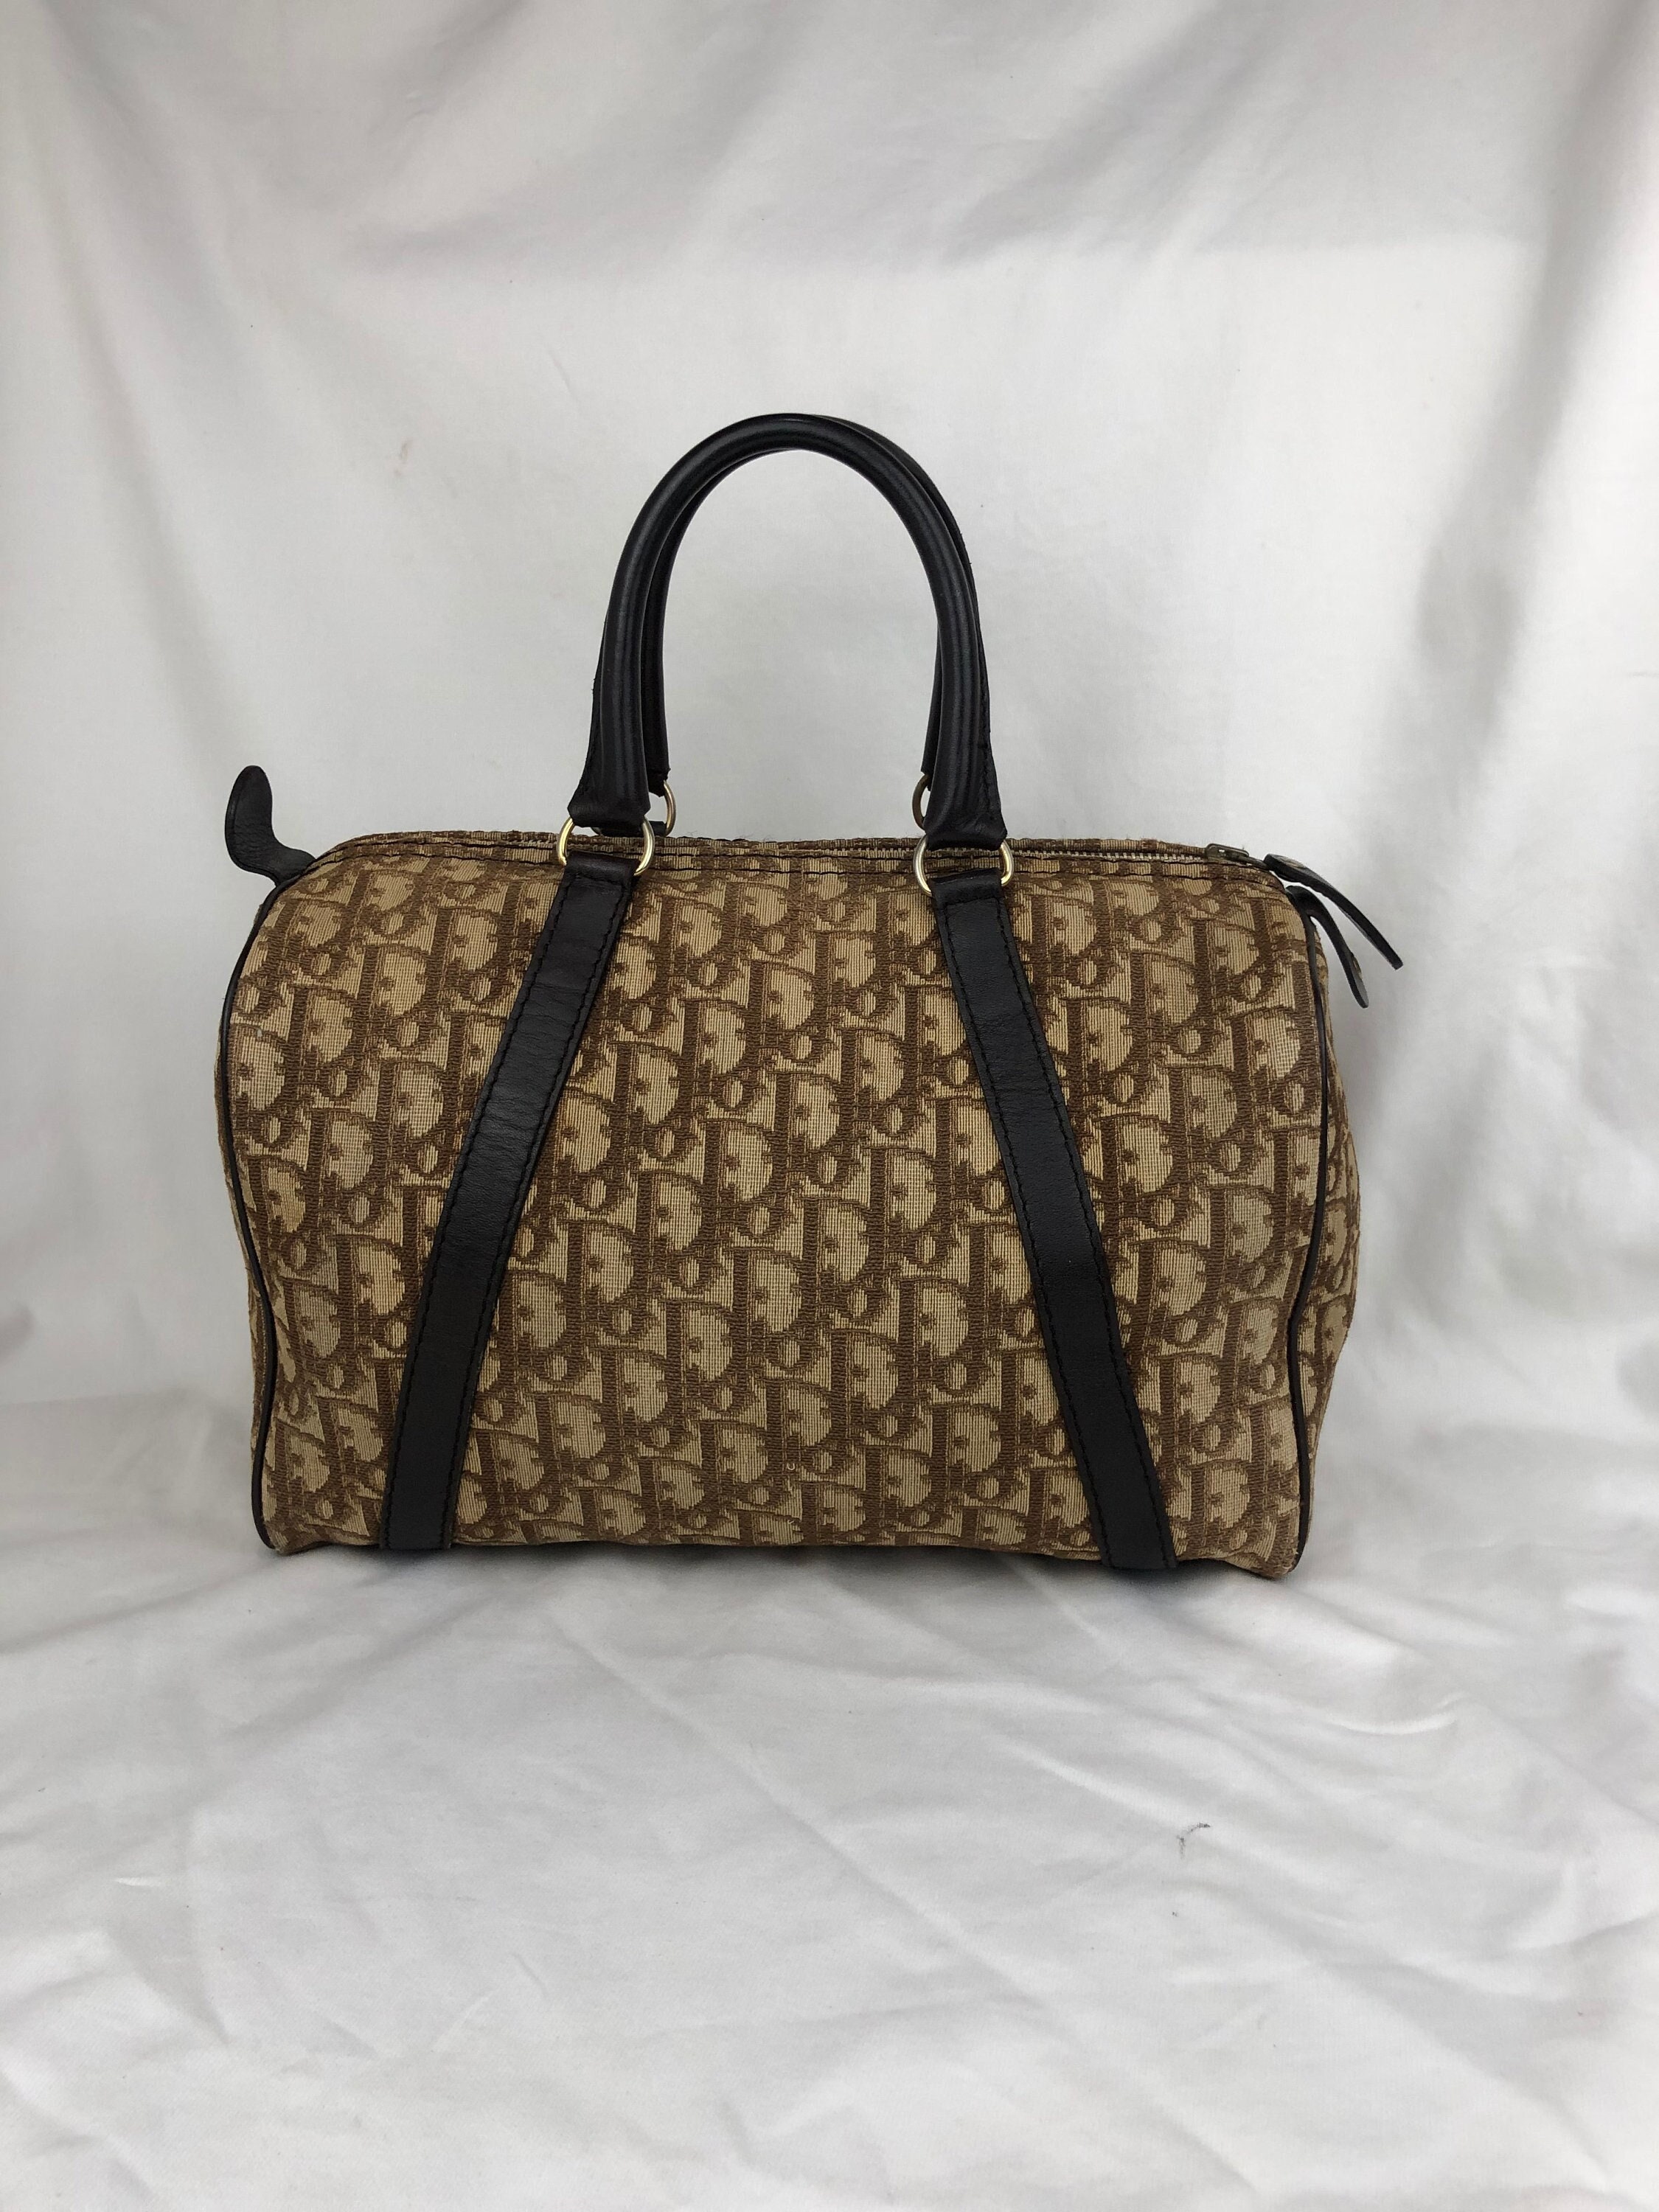 Re:up Depop refuses to issue a refund on a fake LV bag. What now? : r/Depop